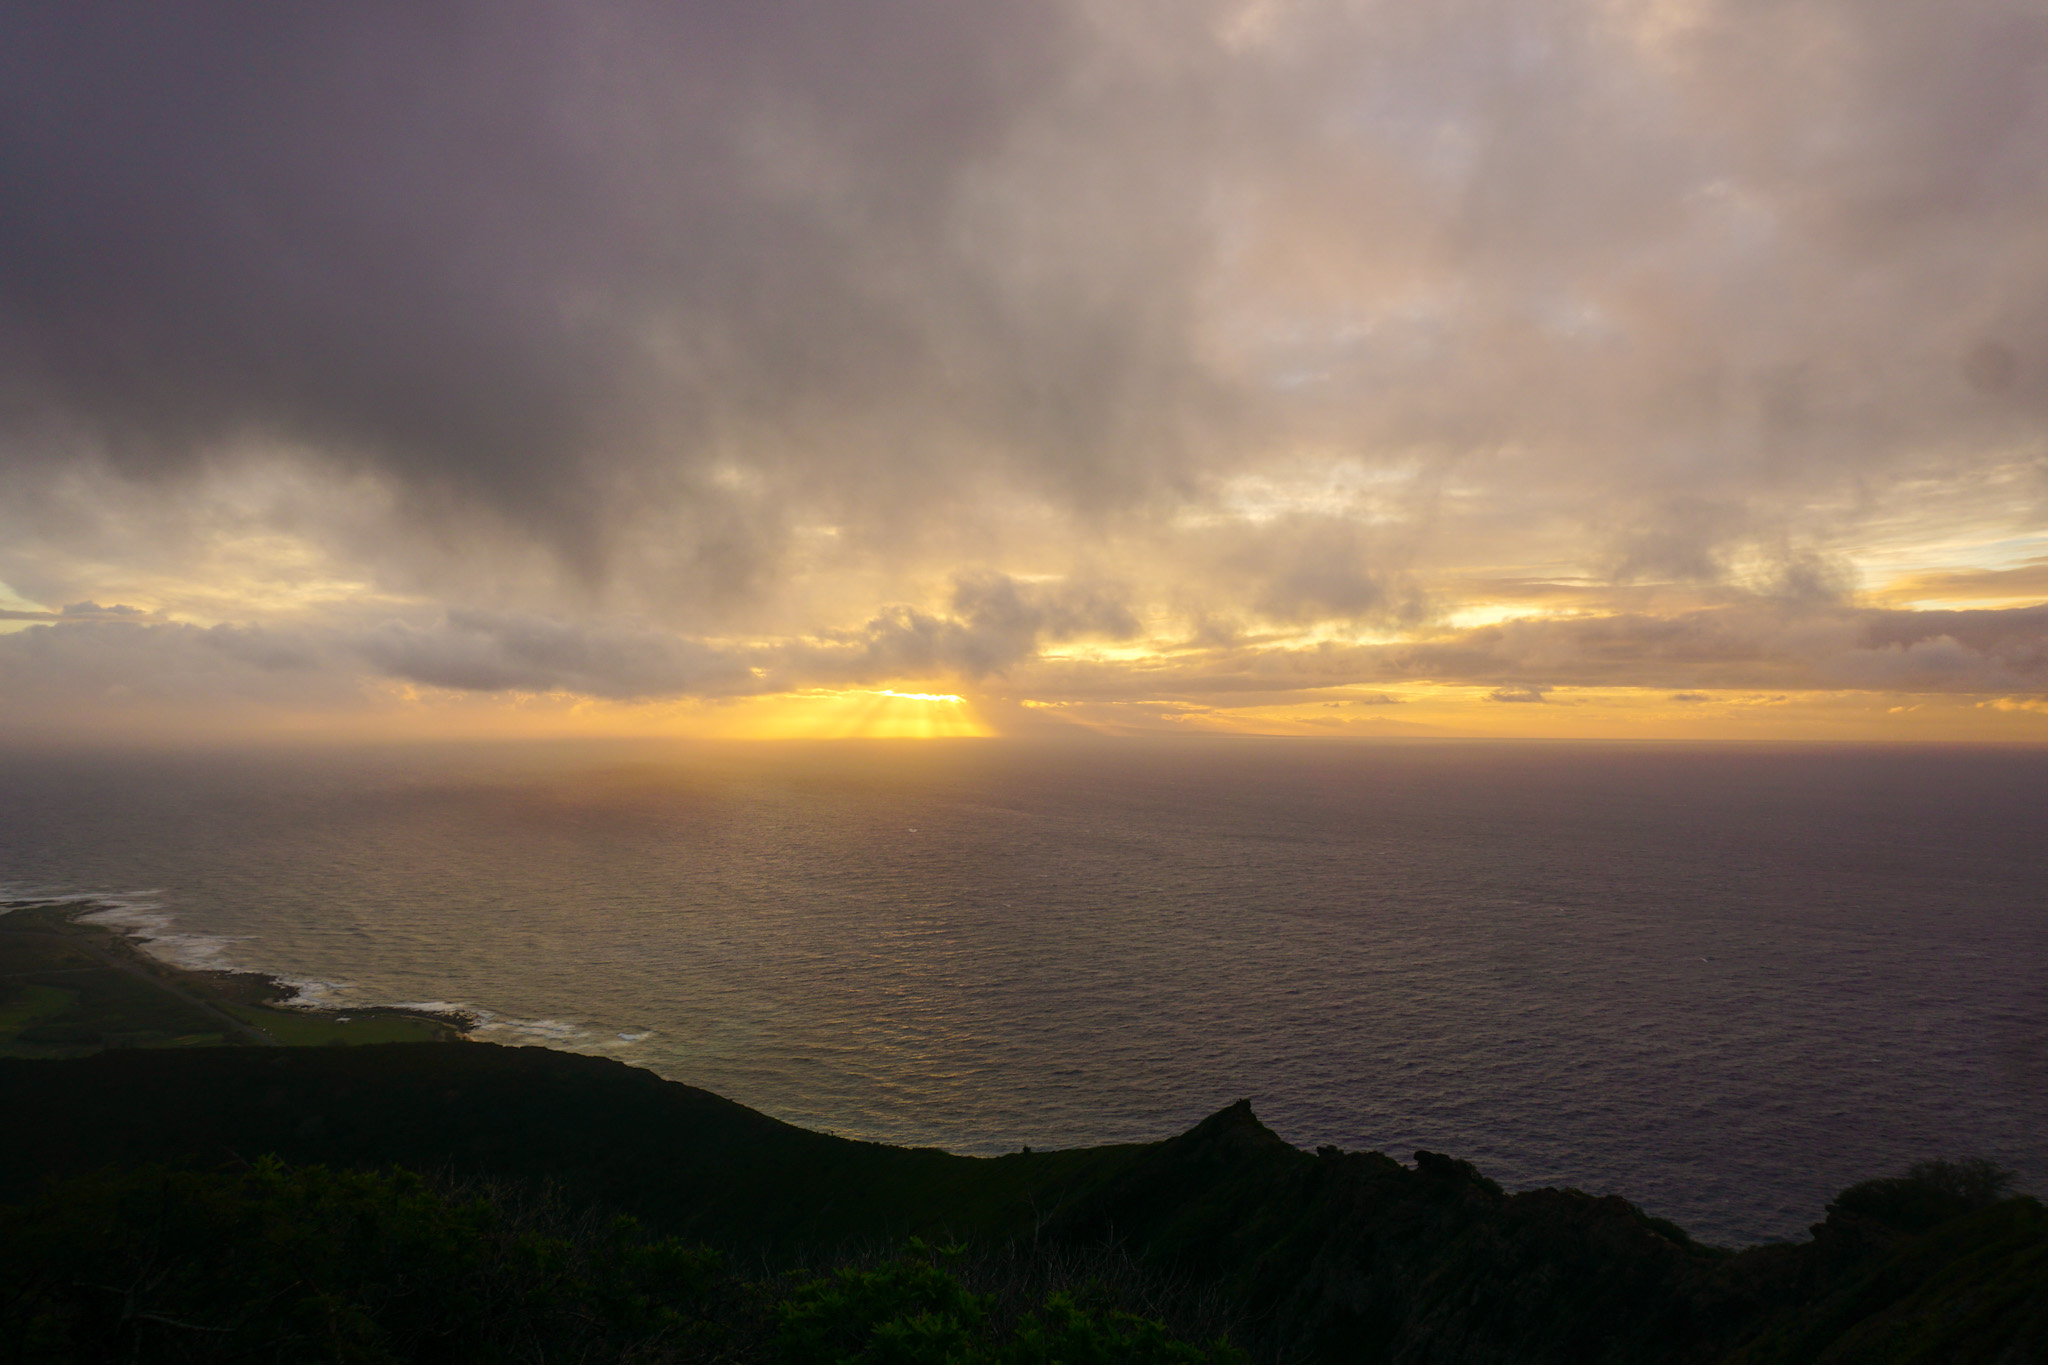 Sunrise atop Koko Crater (View after completing the Koko Head Stairs Hike)